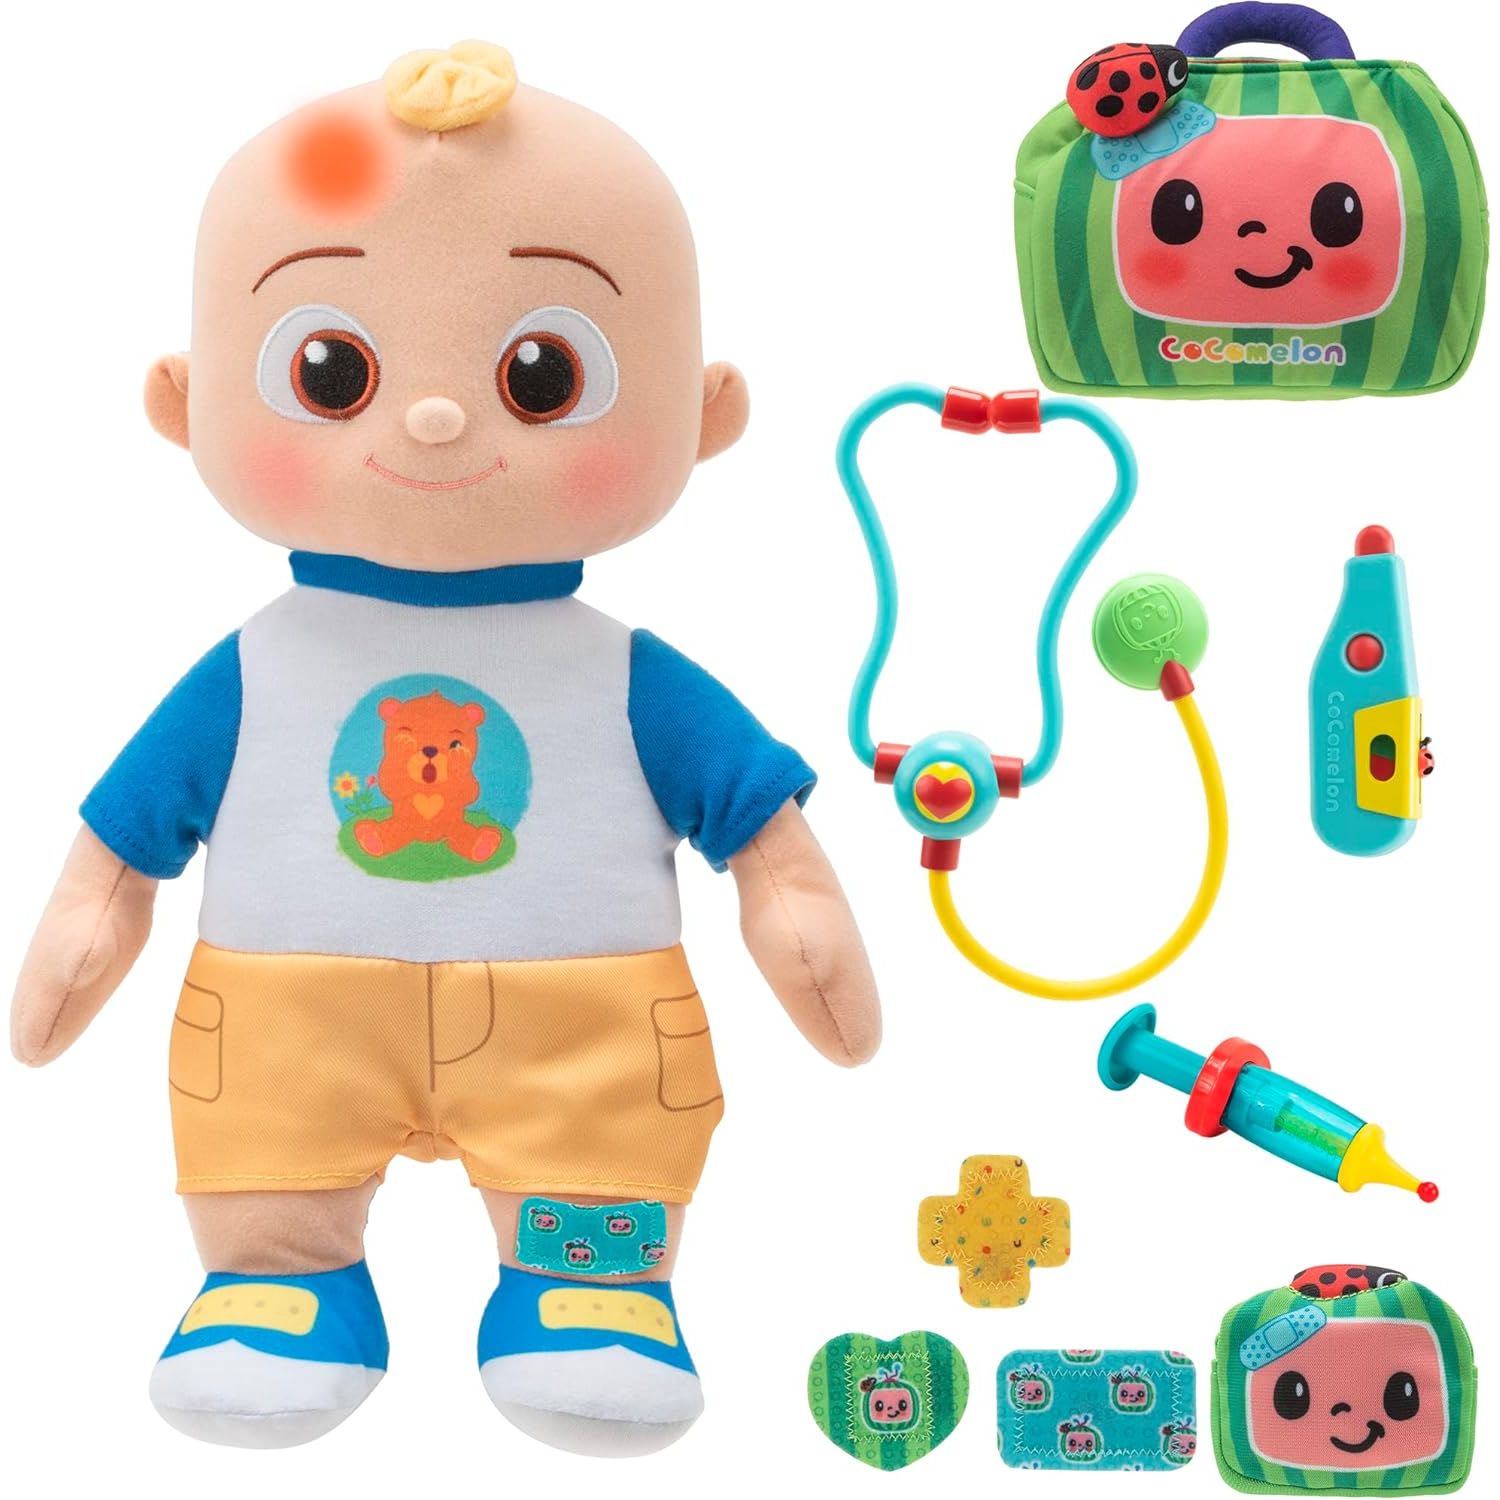 CoComelon Boo Boo JJ Deluxe Feature Plush - Includes Doctor Checkup Bag, Bandages, and Accessories to Care for JJ